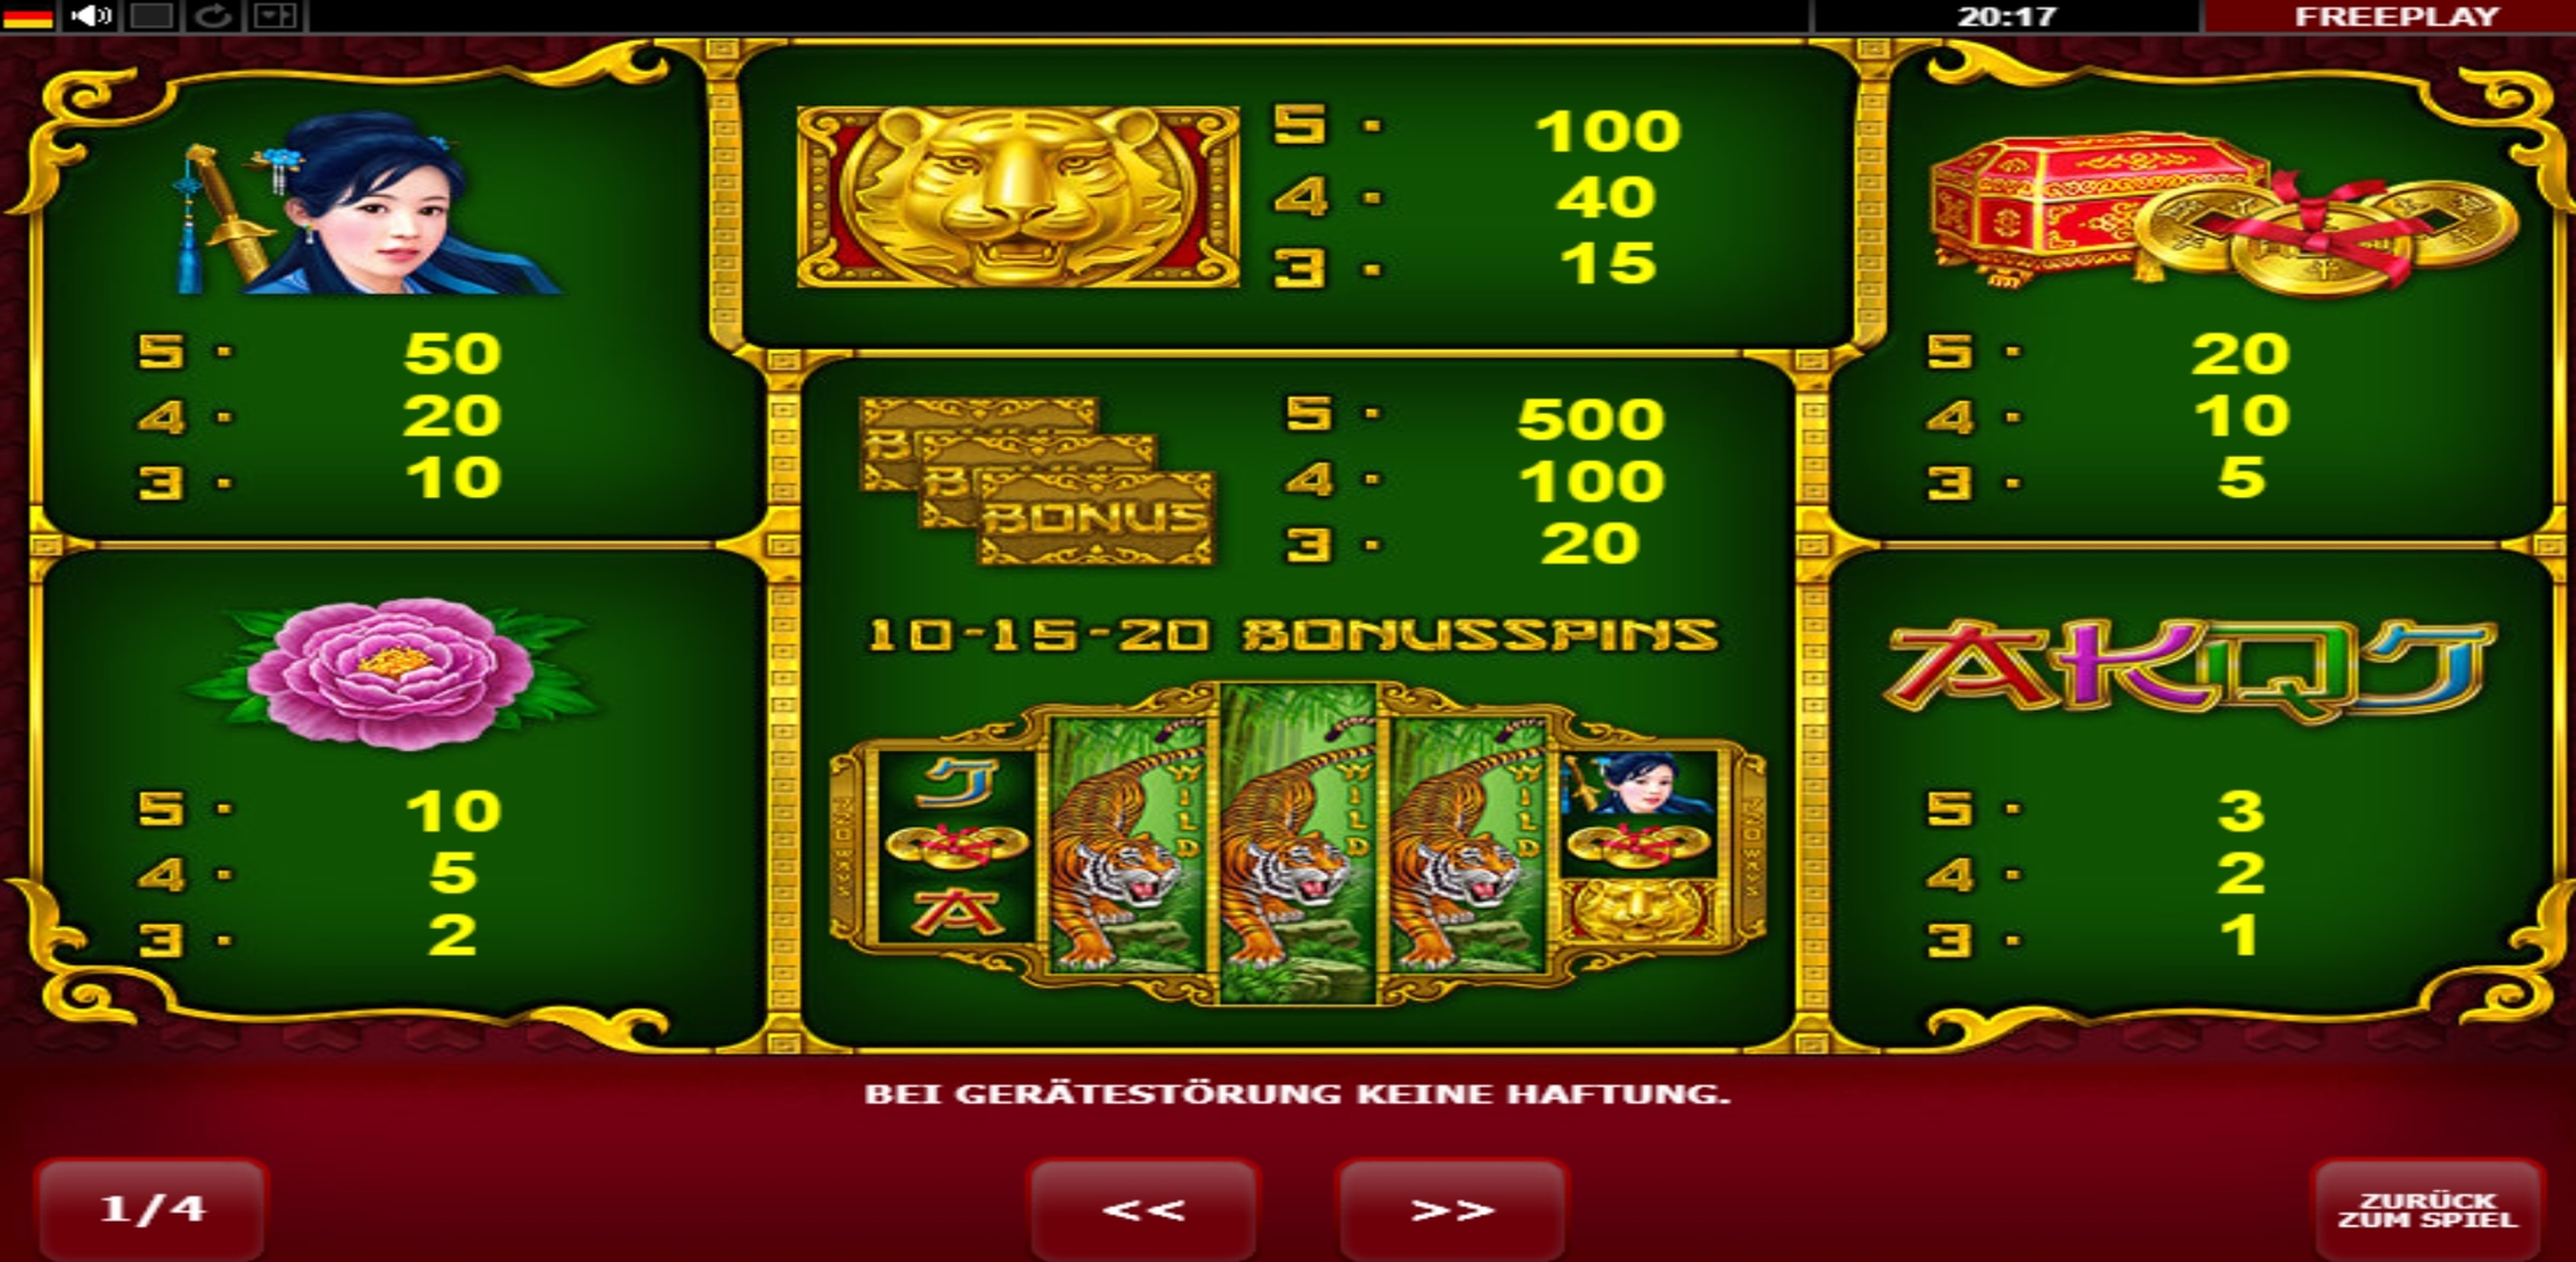 Info of Grand Tiger Slot Game by Amatic Industries